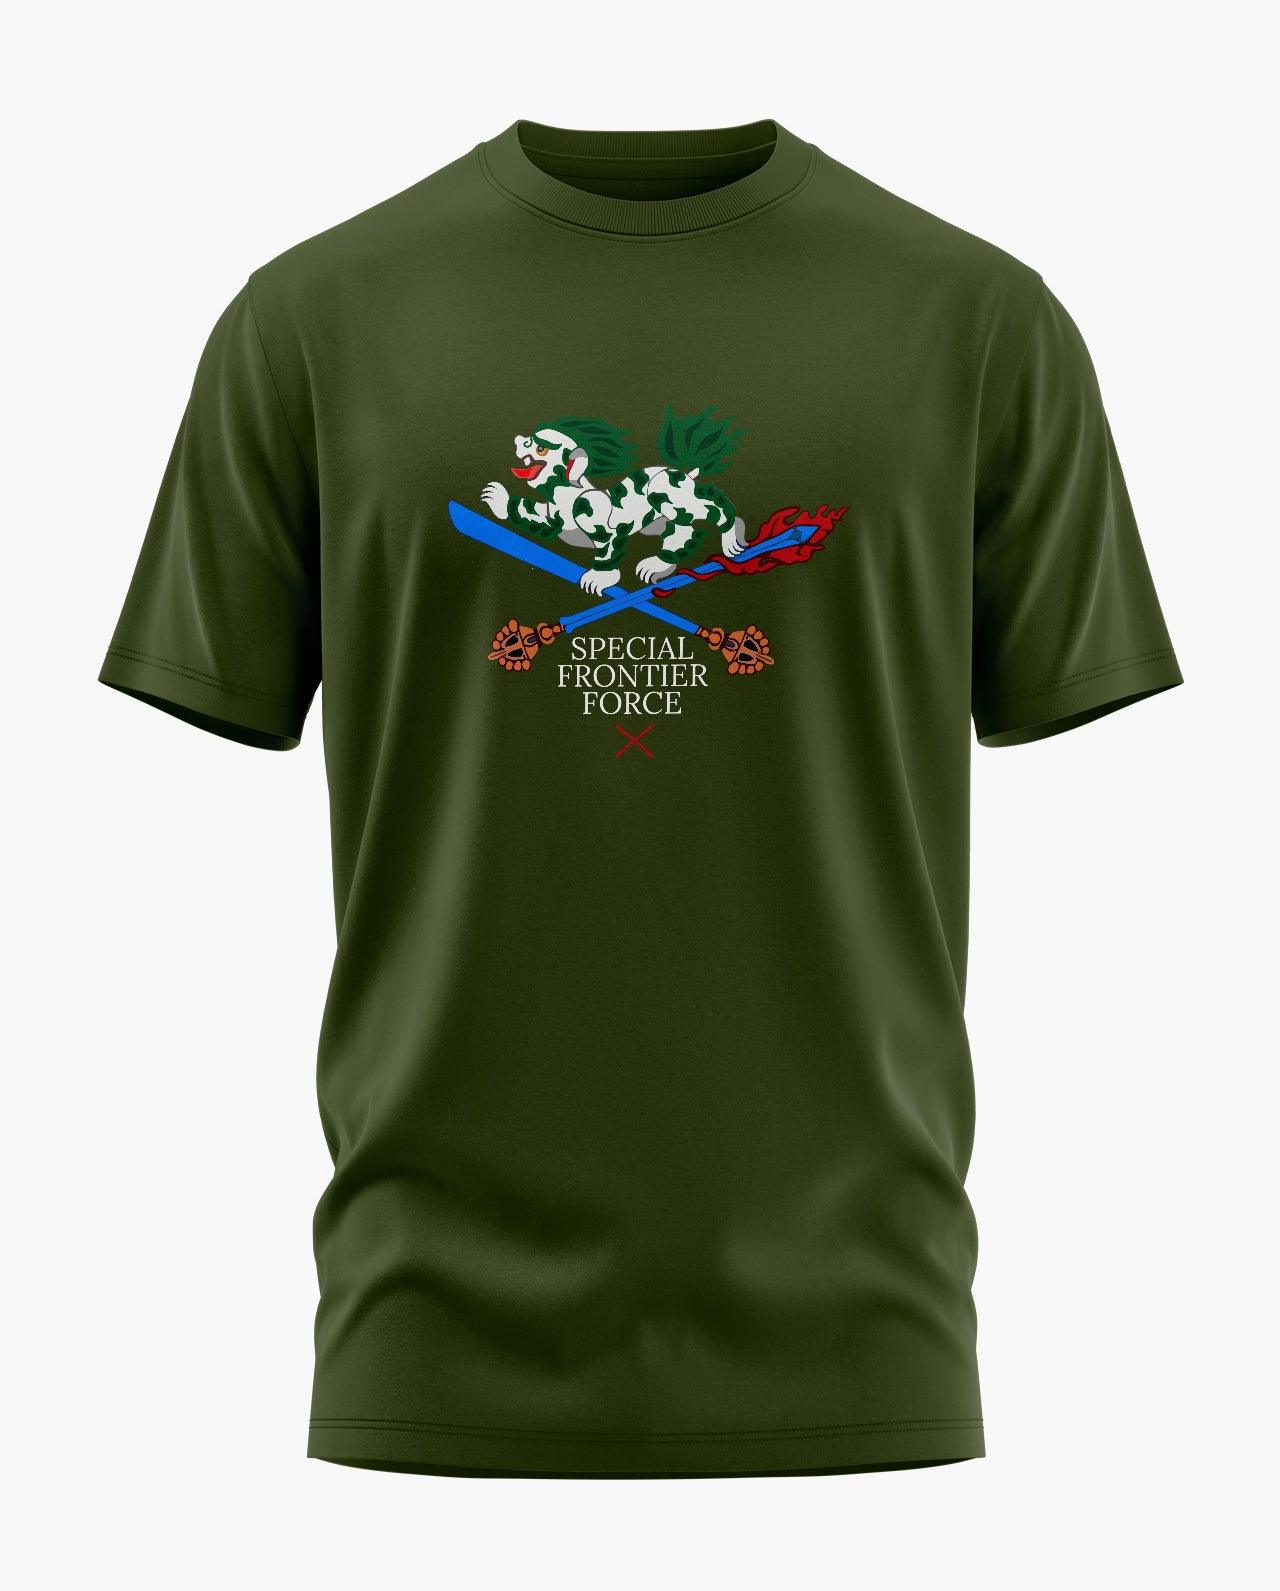 Special Frontier Force T-Shirt - Aero Armour